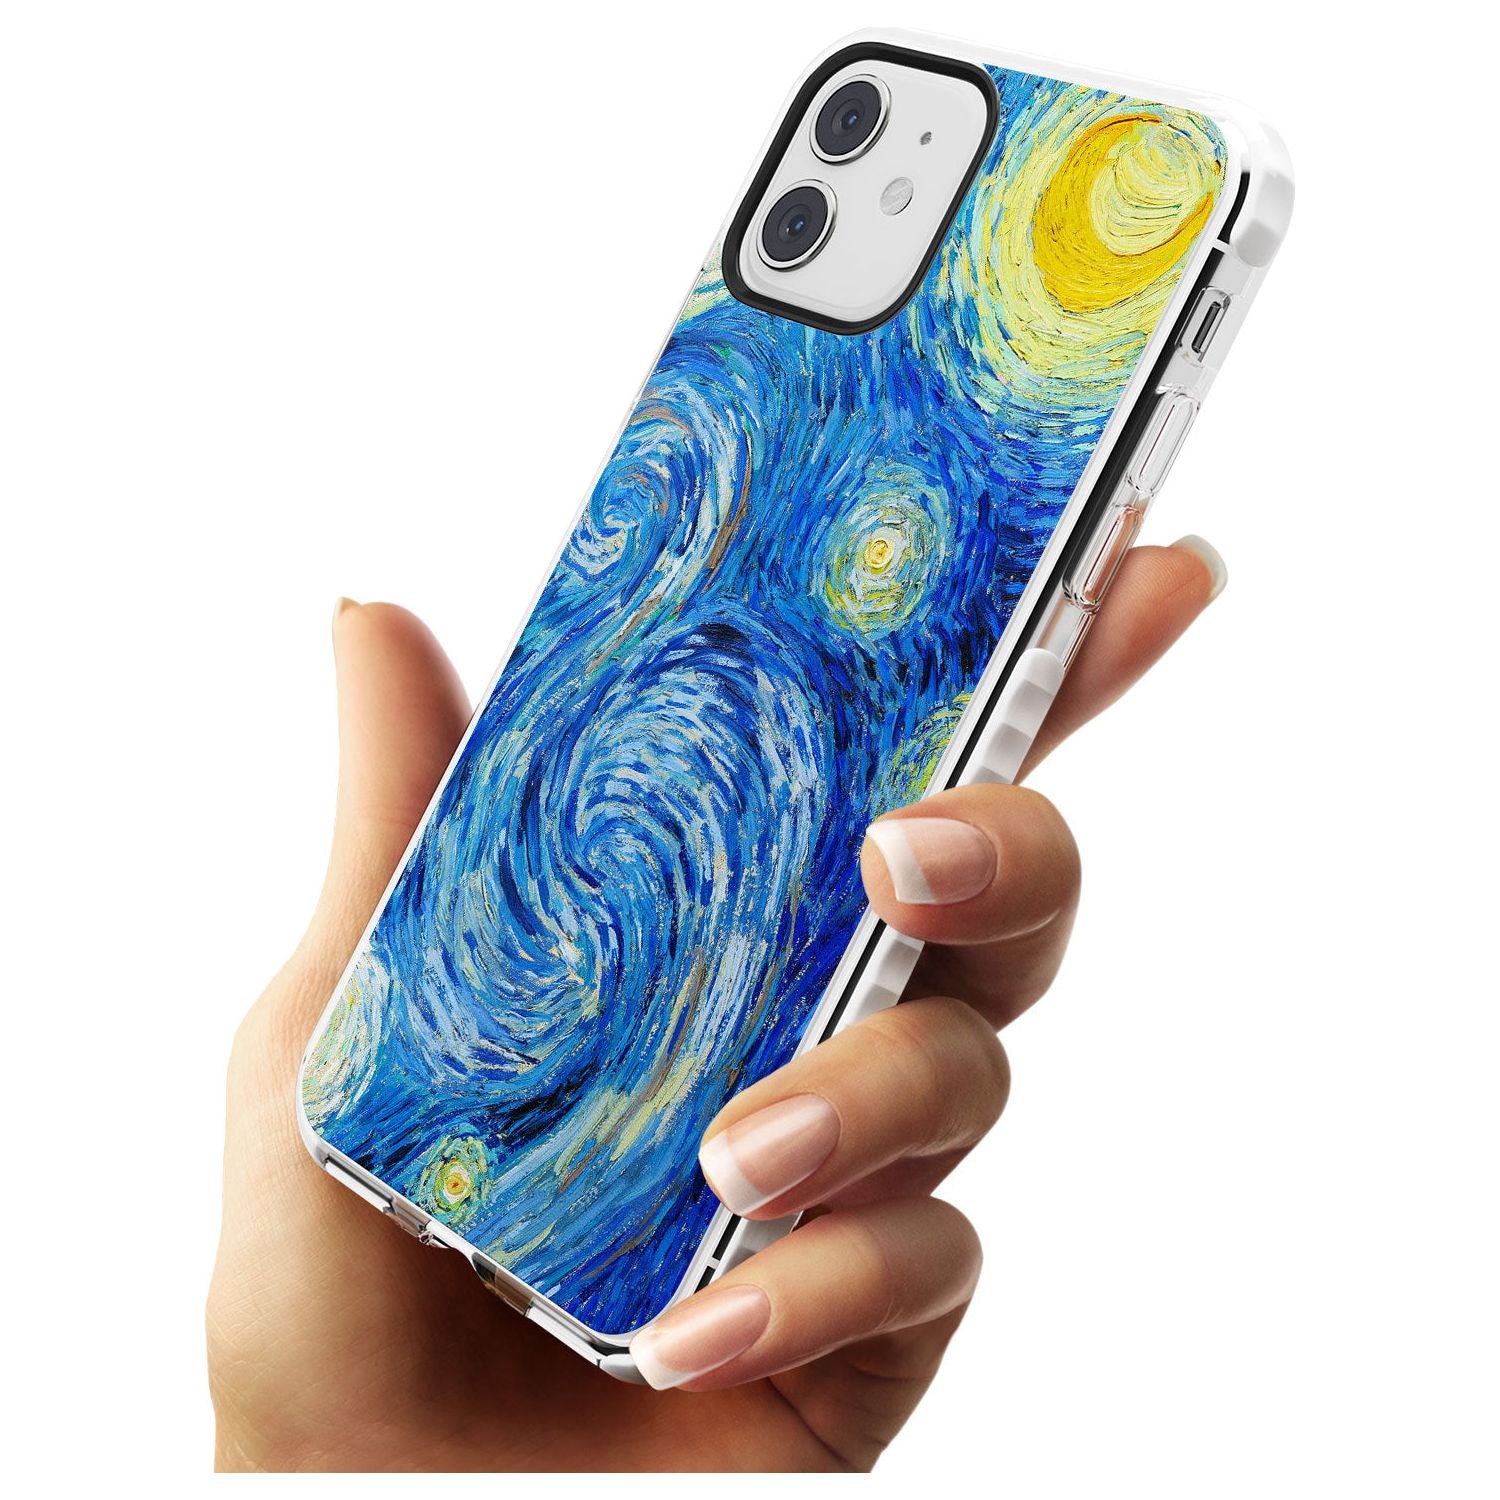 The Starry Night by Vincent Van Gogh Slim TPU Phone Case for iPhone 11